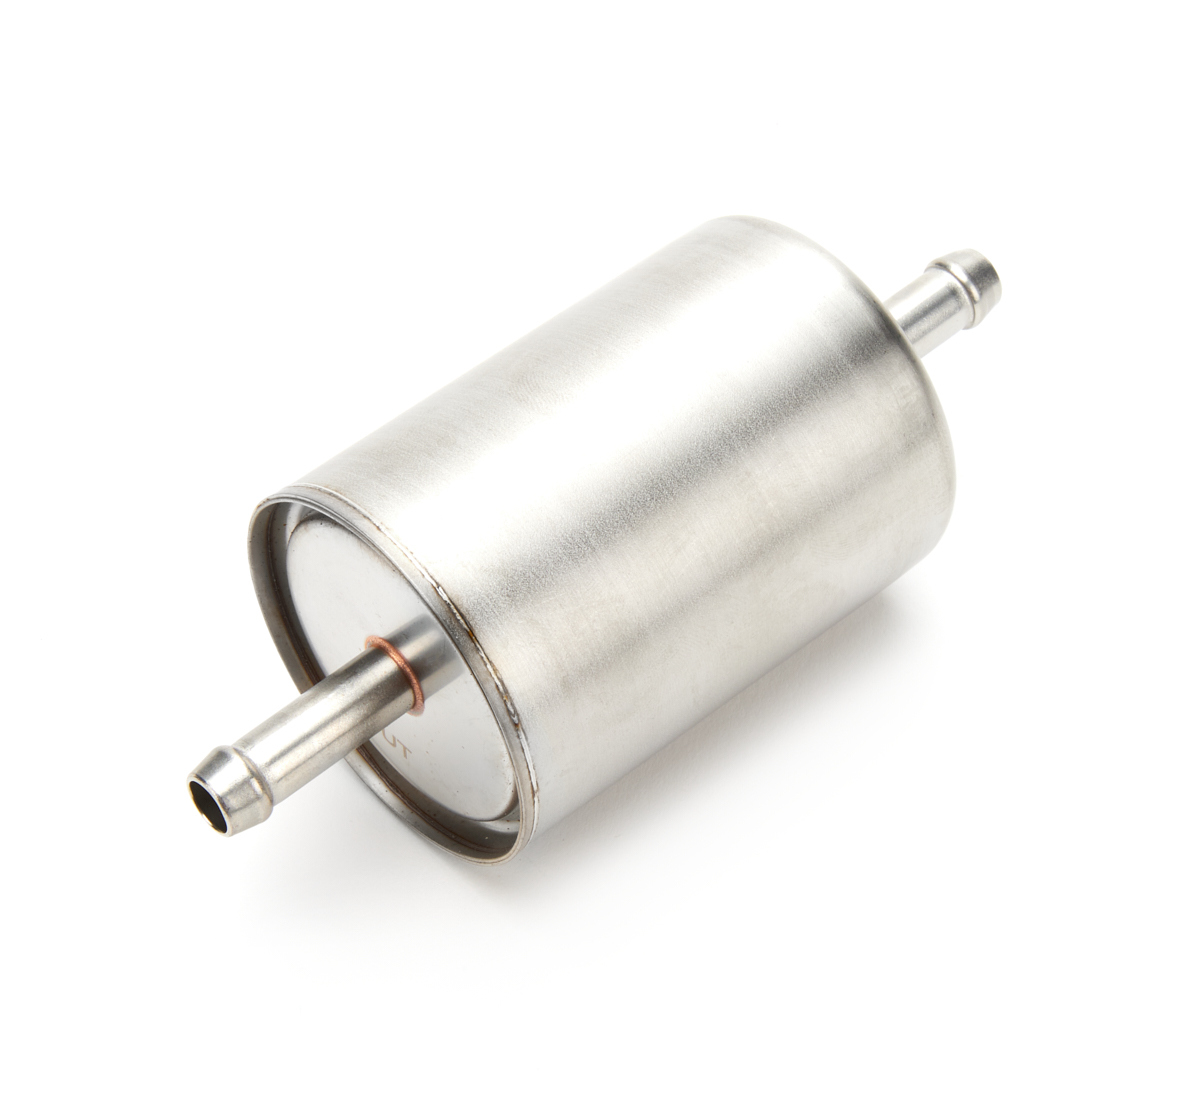 Specialty Products 9269 Fuel Filter, In-Line, 5 Micron, Paper Element, 3/8 in Hose Barb Inlet, 3/8 in Hose Barb Outlet, Stainless, Natural, Each